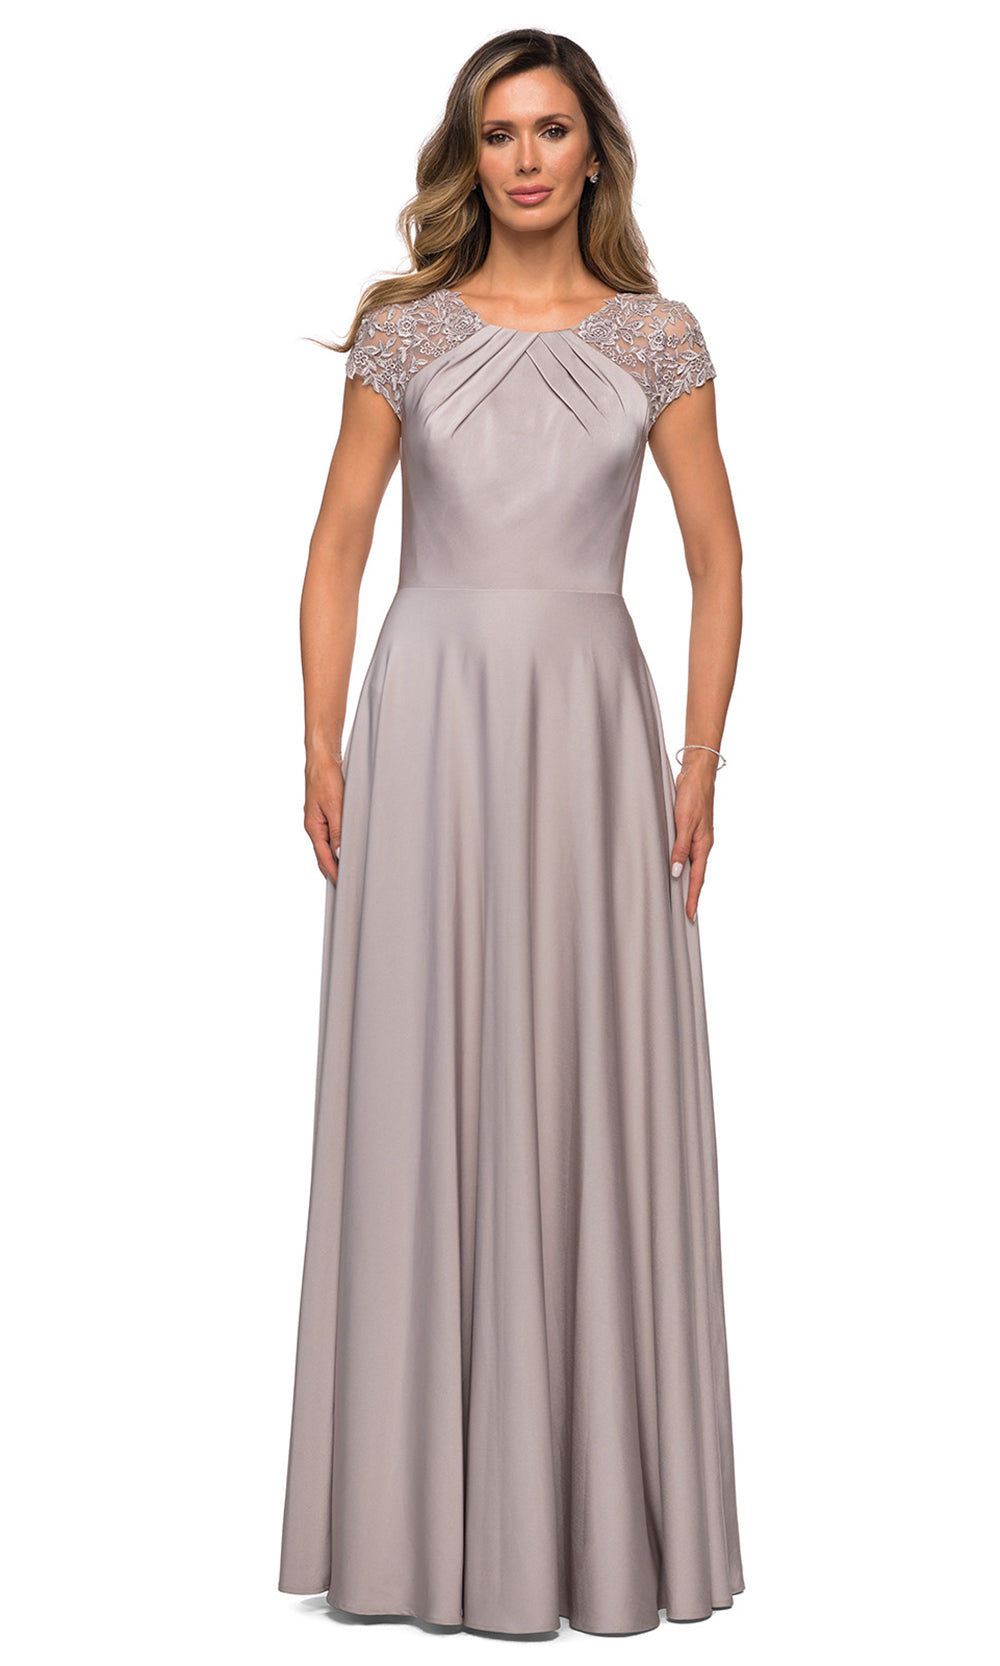 La Femme - 28100 Lace And Satin A-Line Gown In Silver